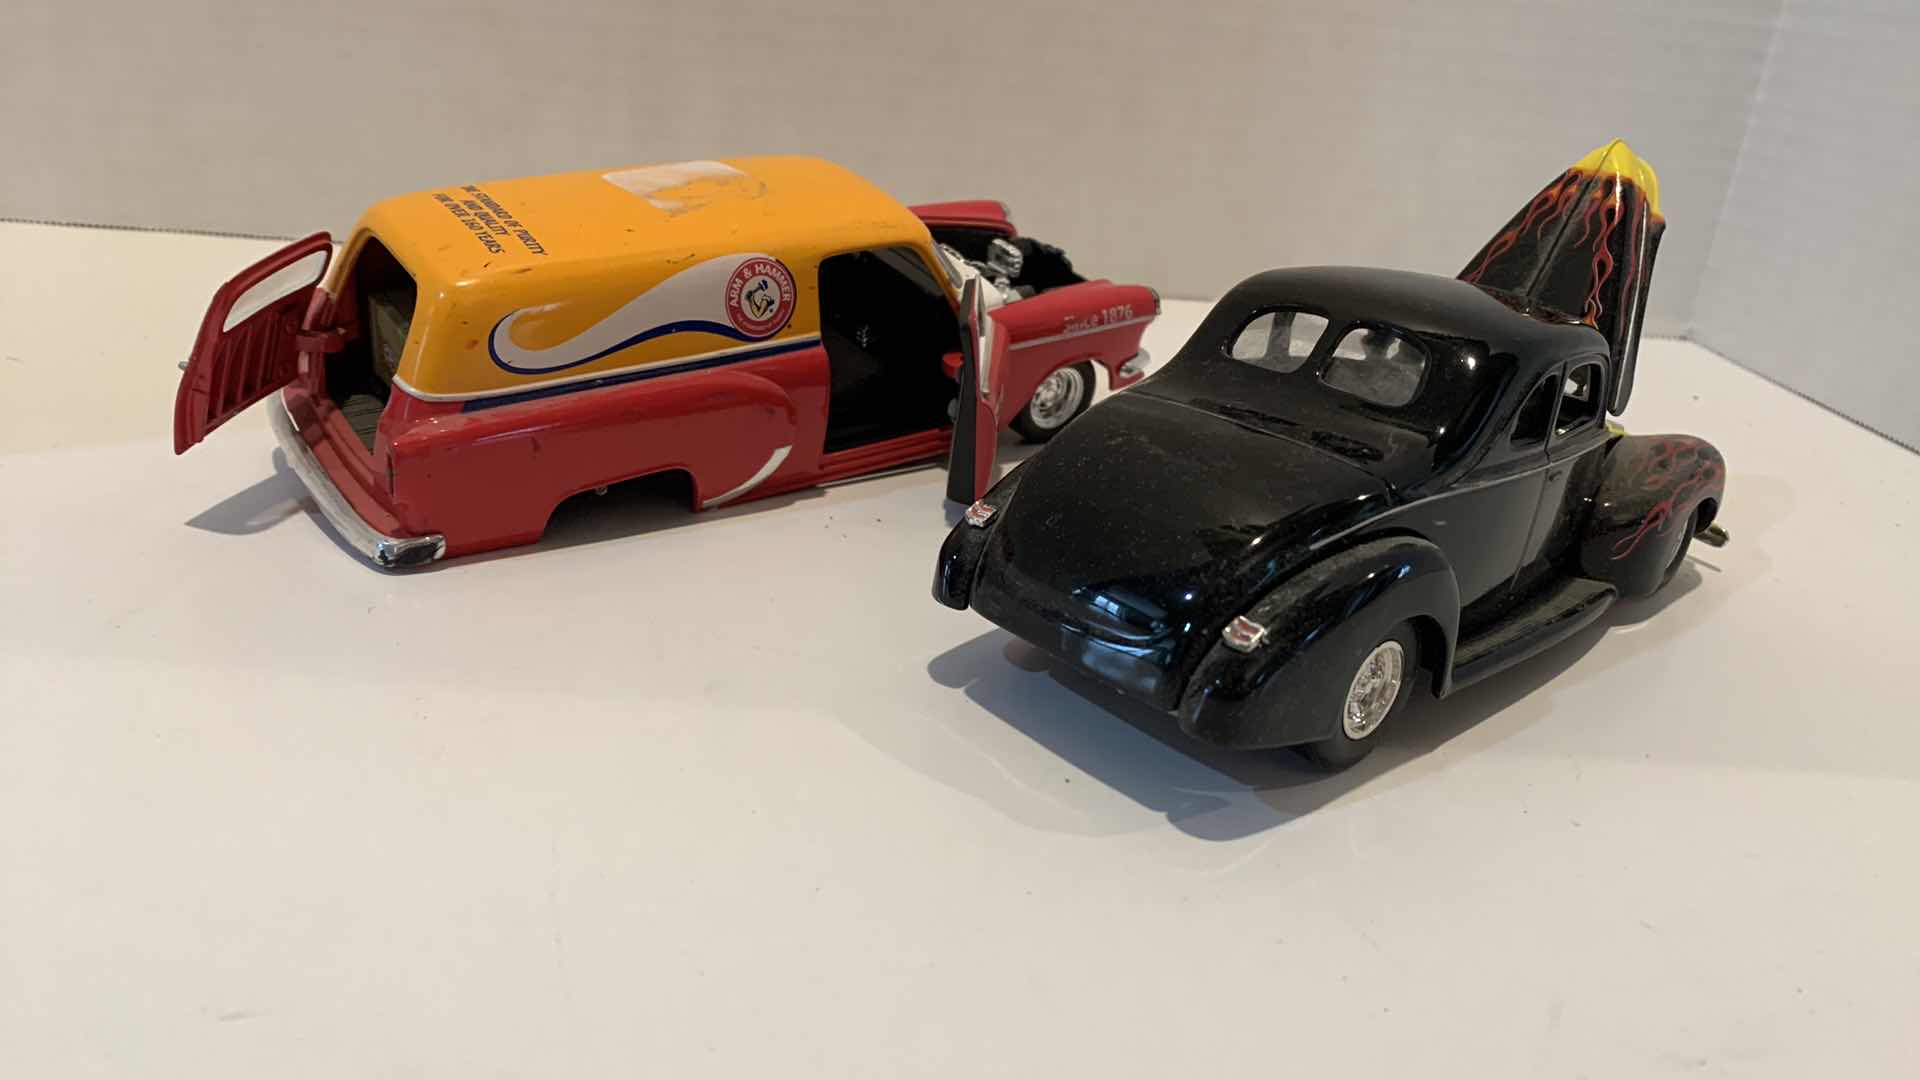 Photo 2 of 2 COLLECTABLE CARS 54 CHEVY